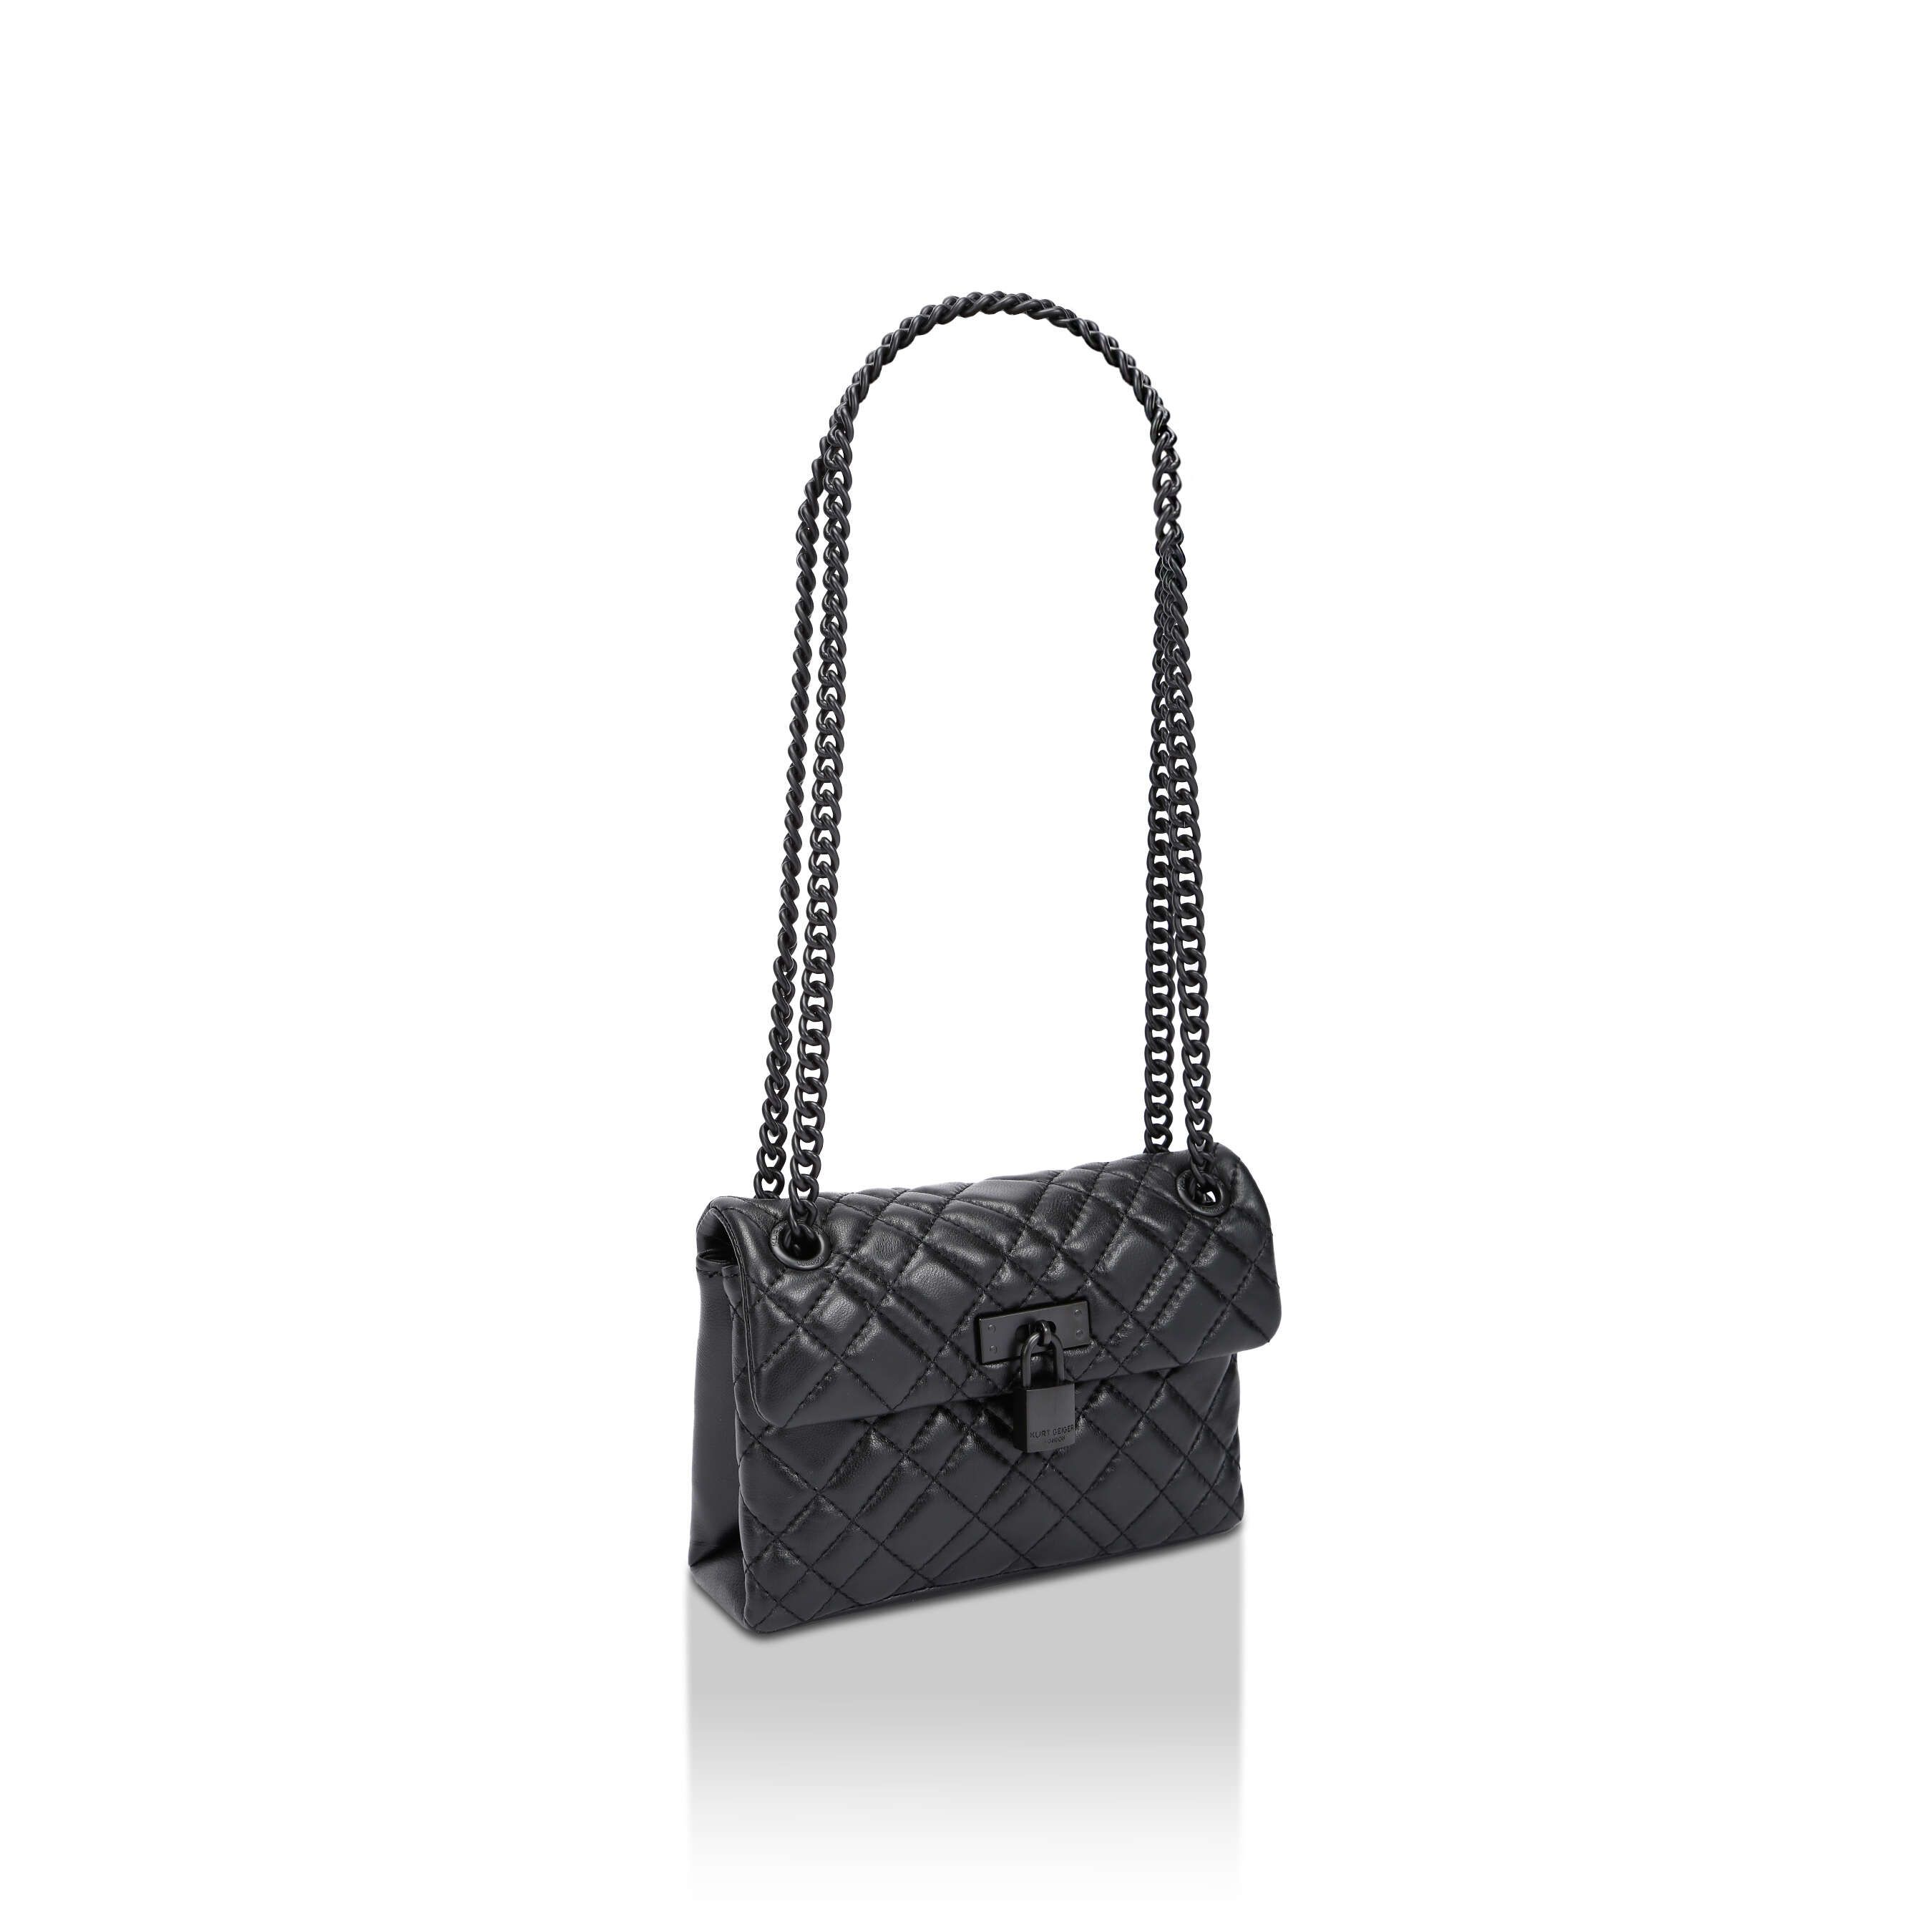 The KGL Mini Brixton Lock Bag is crafted in a black leather with overstitch quilting. The black metal branded padlock sits on the flap. 14cm (H), 20cm (L), 6cm (D). Strap drop cross body: 120cm. Strap drop shoulder: 70cm.